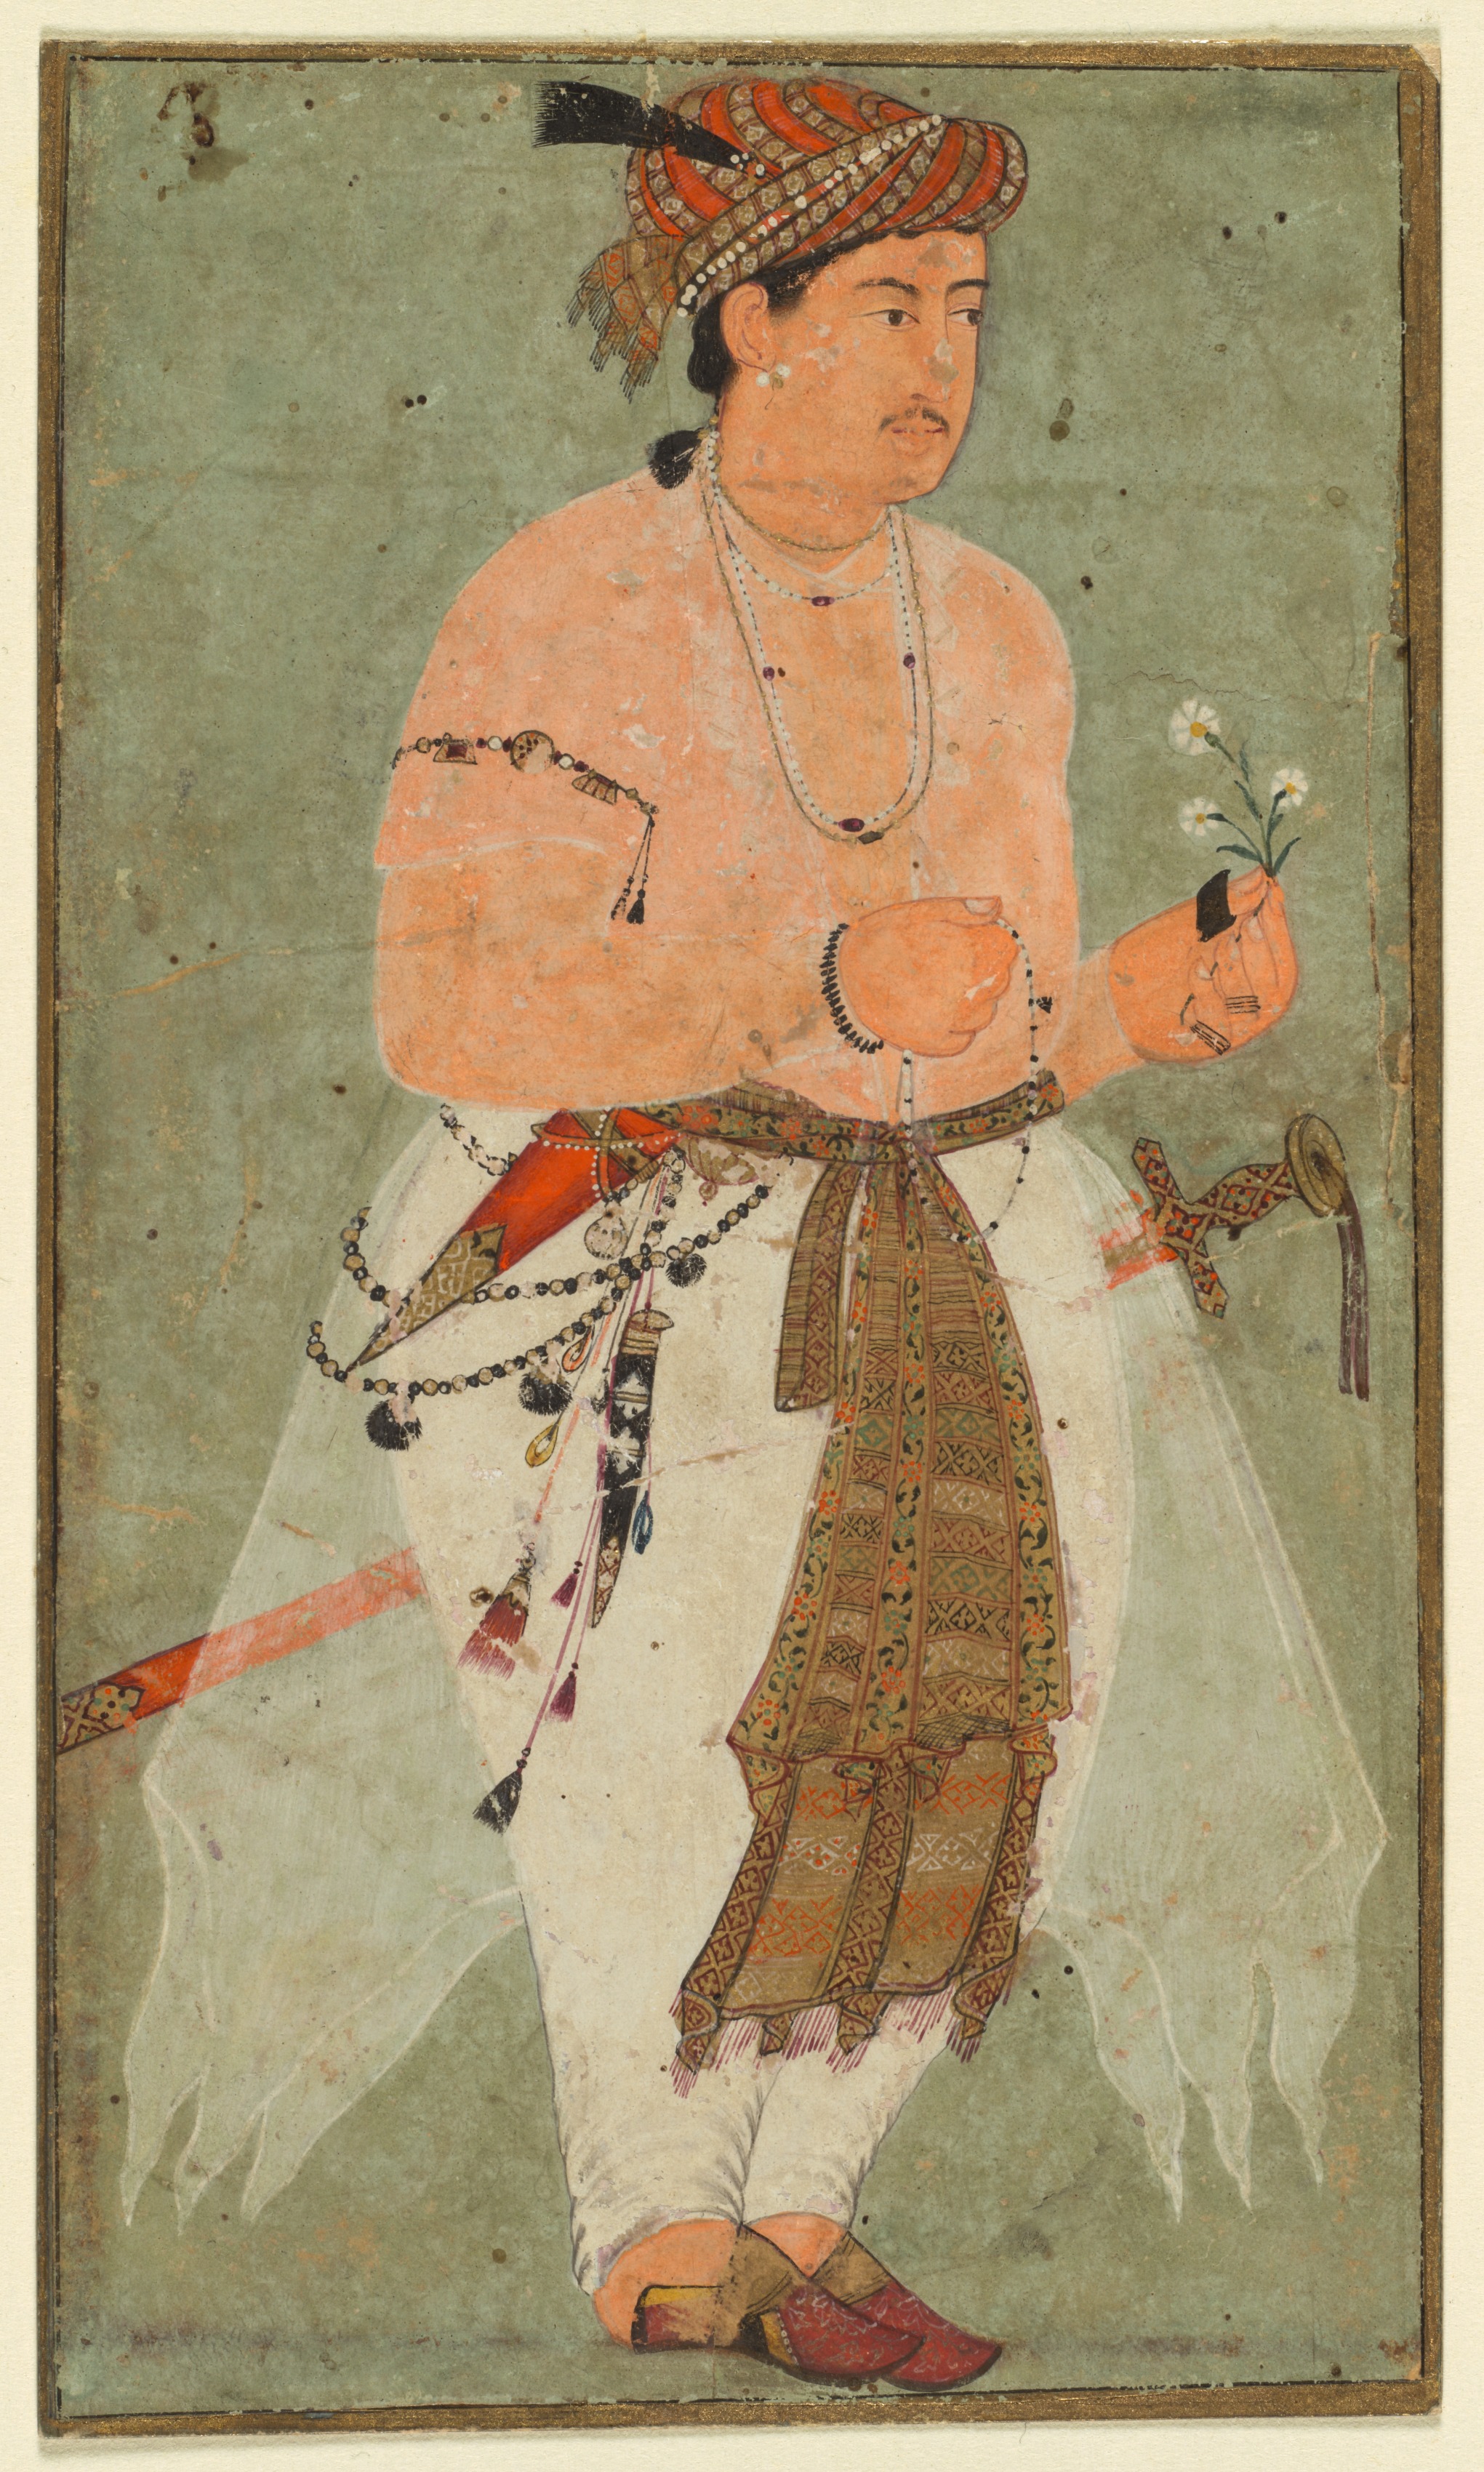 A Mughal Prince, Perhaps Danyal, Holding a Sprig of Flowers